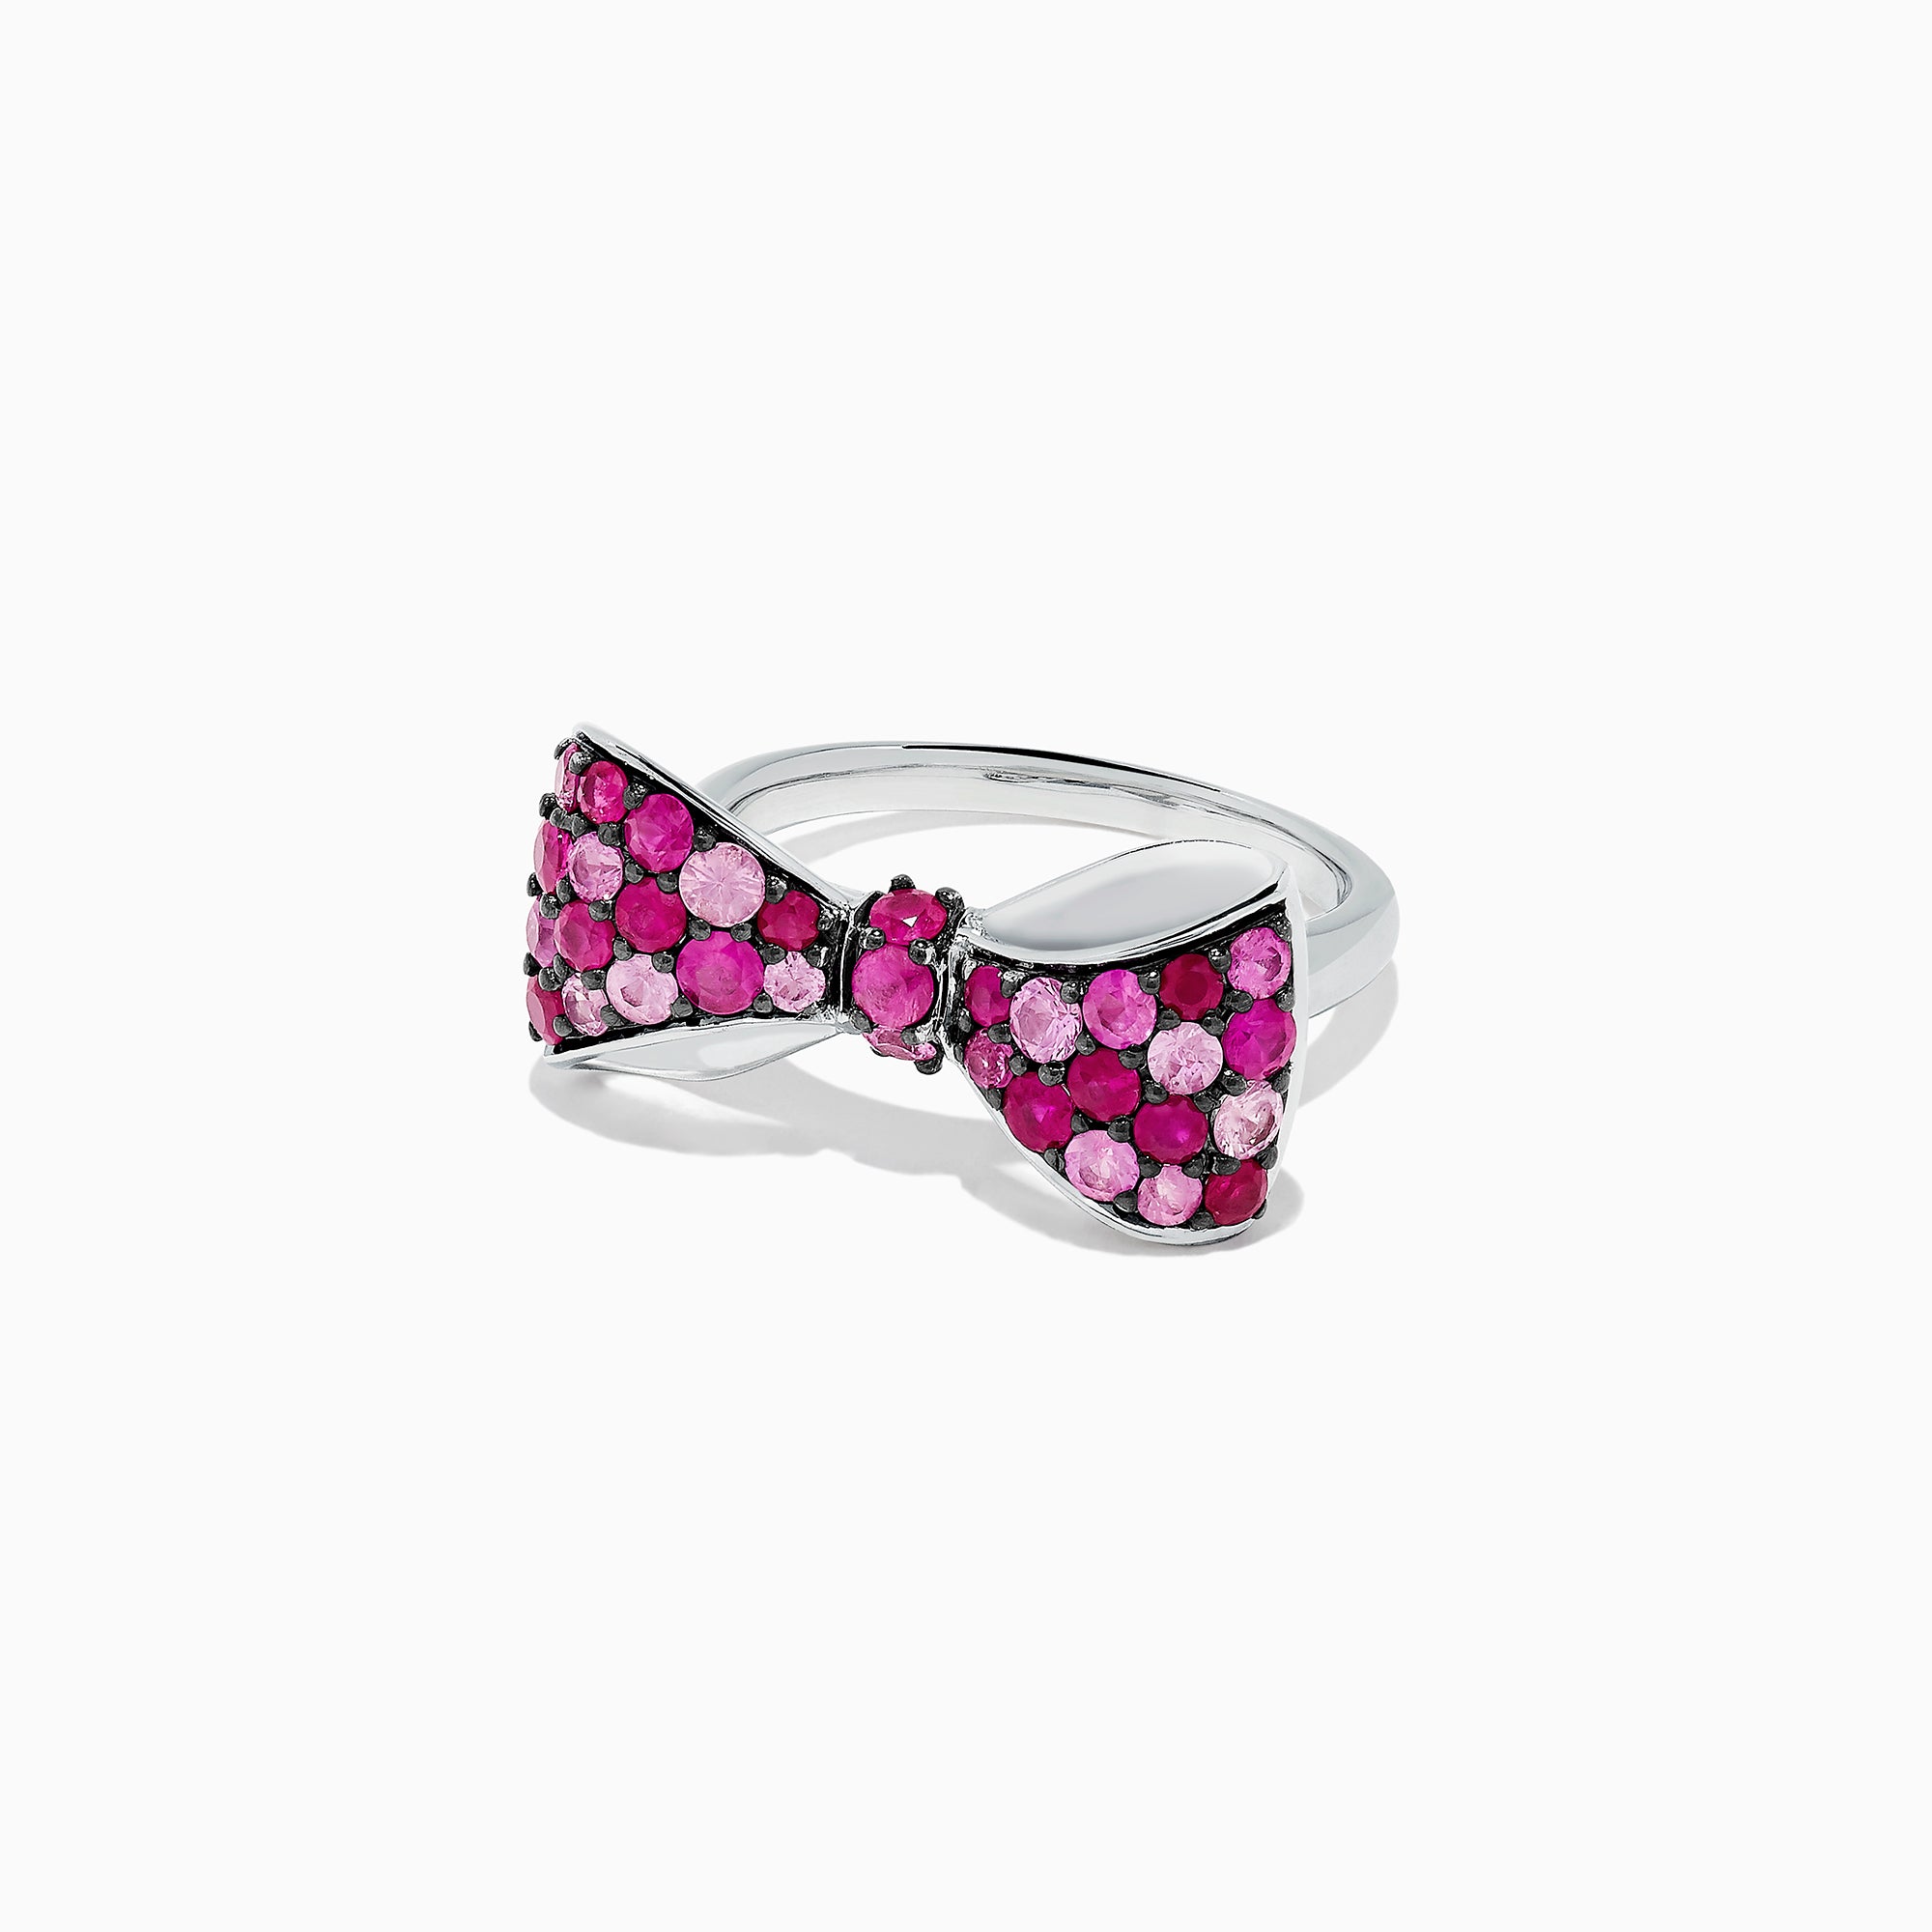 Effy 925 Sterling Silver Ruby and Pink Sapphire Splash Bowtie Ring, 1. 